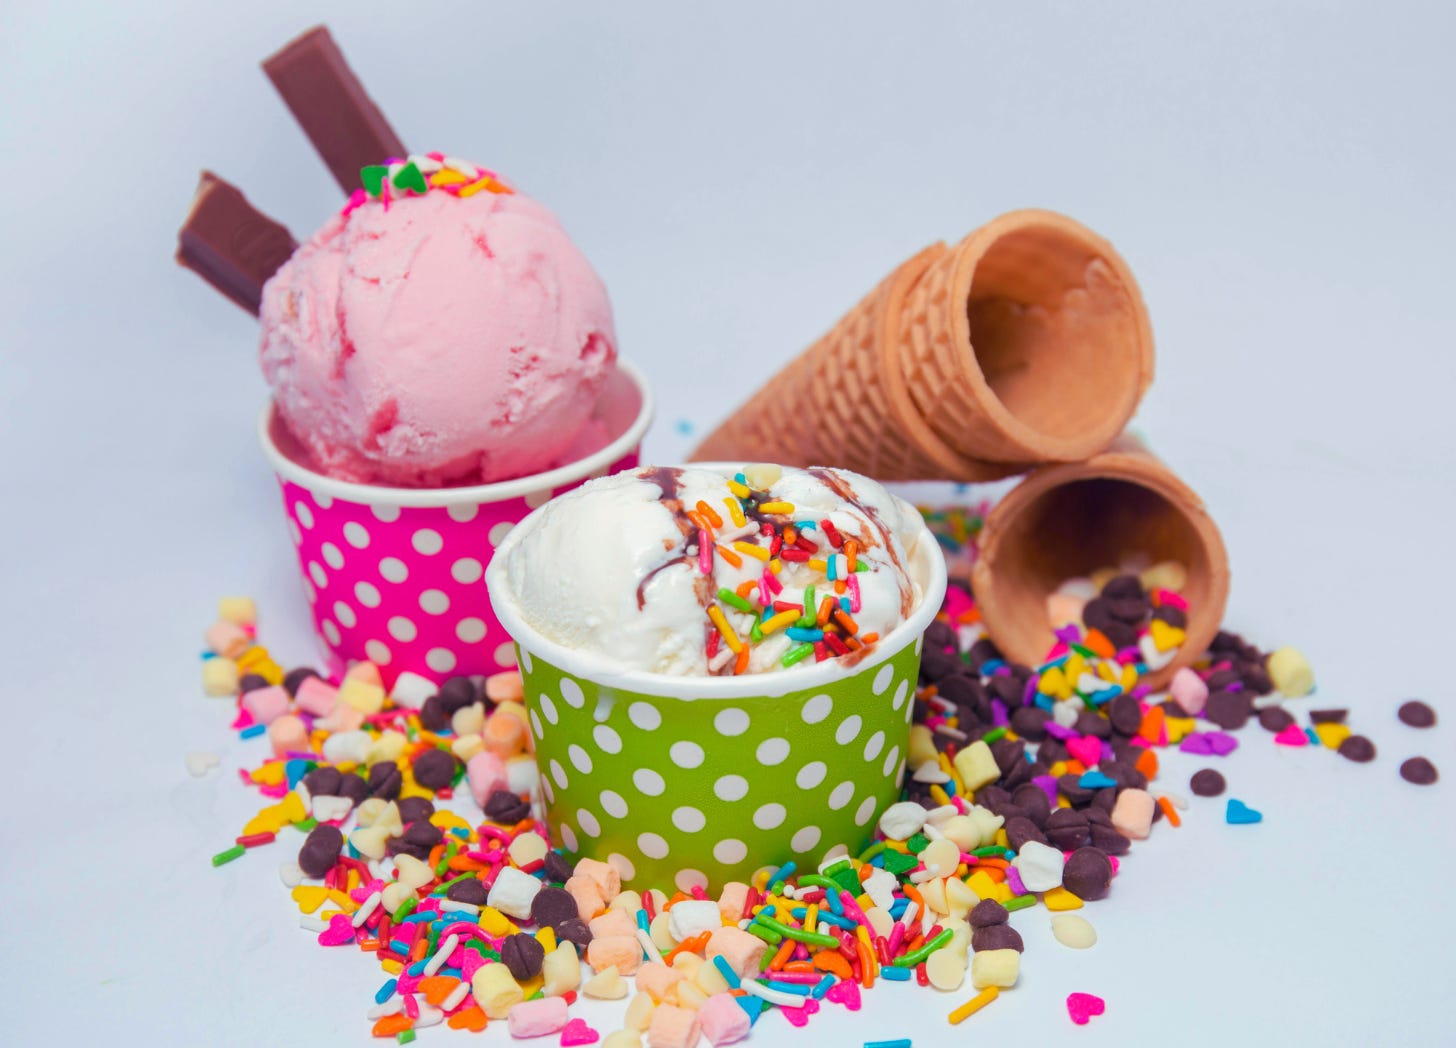 Two cups of ice cream with sprinkles and chocolate pieces, alongside empty waffle cones on a white background.